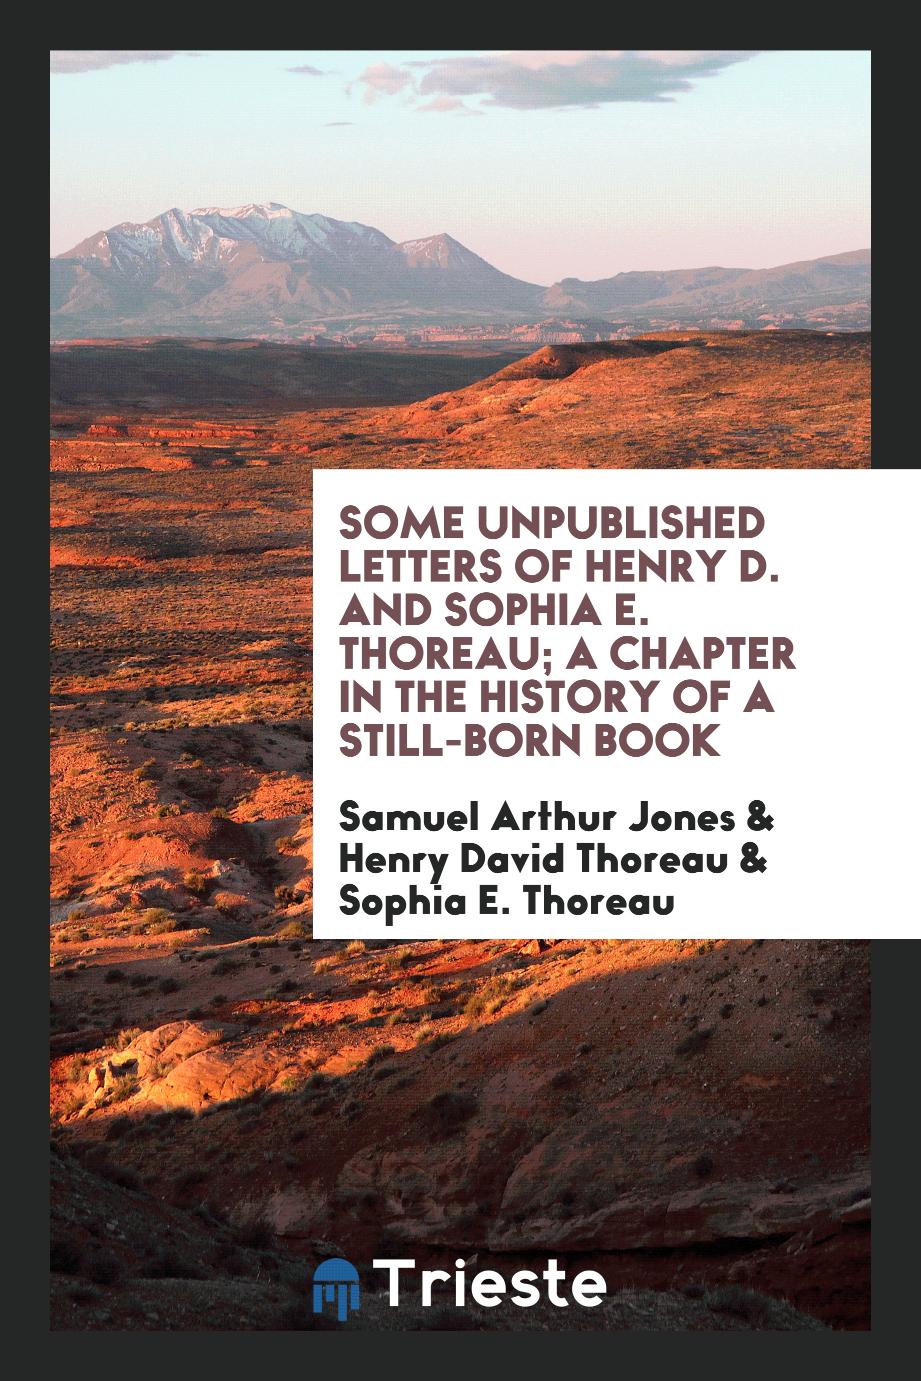 Some unpublished letters of Henry D. and Sophia E. Thoreau; a chapter in the history of a still-born book